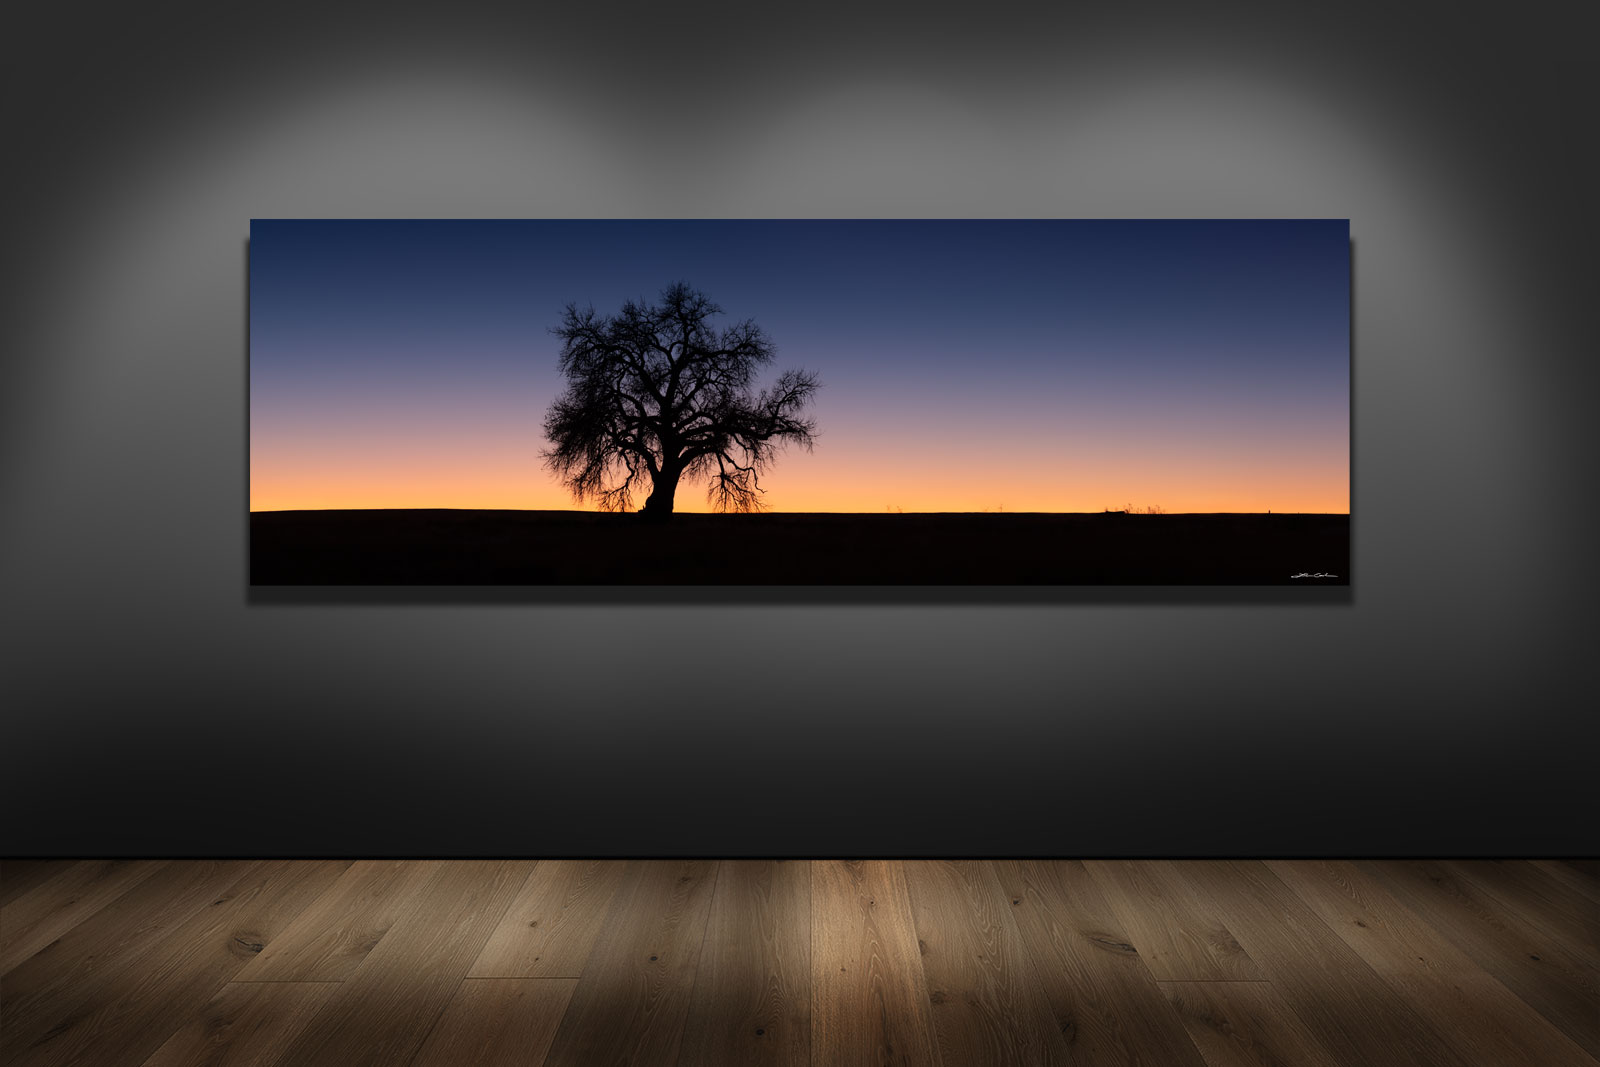 A panoramic fine art image of a tree silhouette on a gallery wall